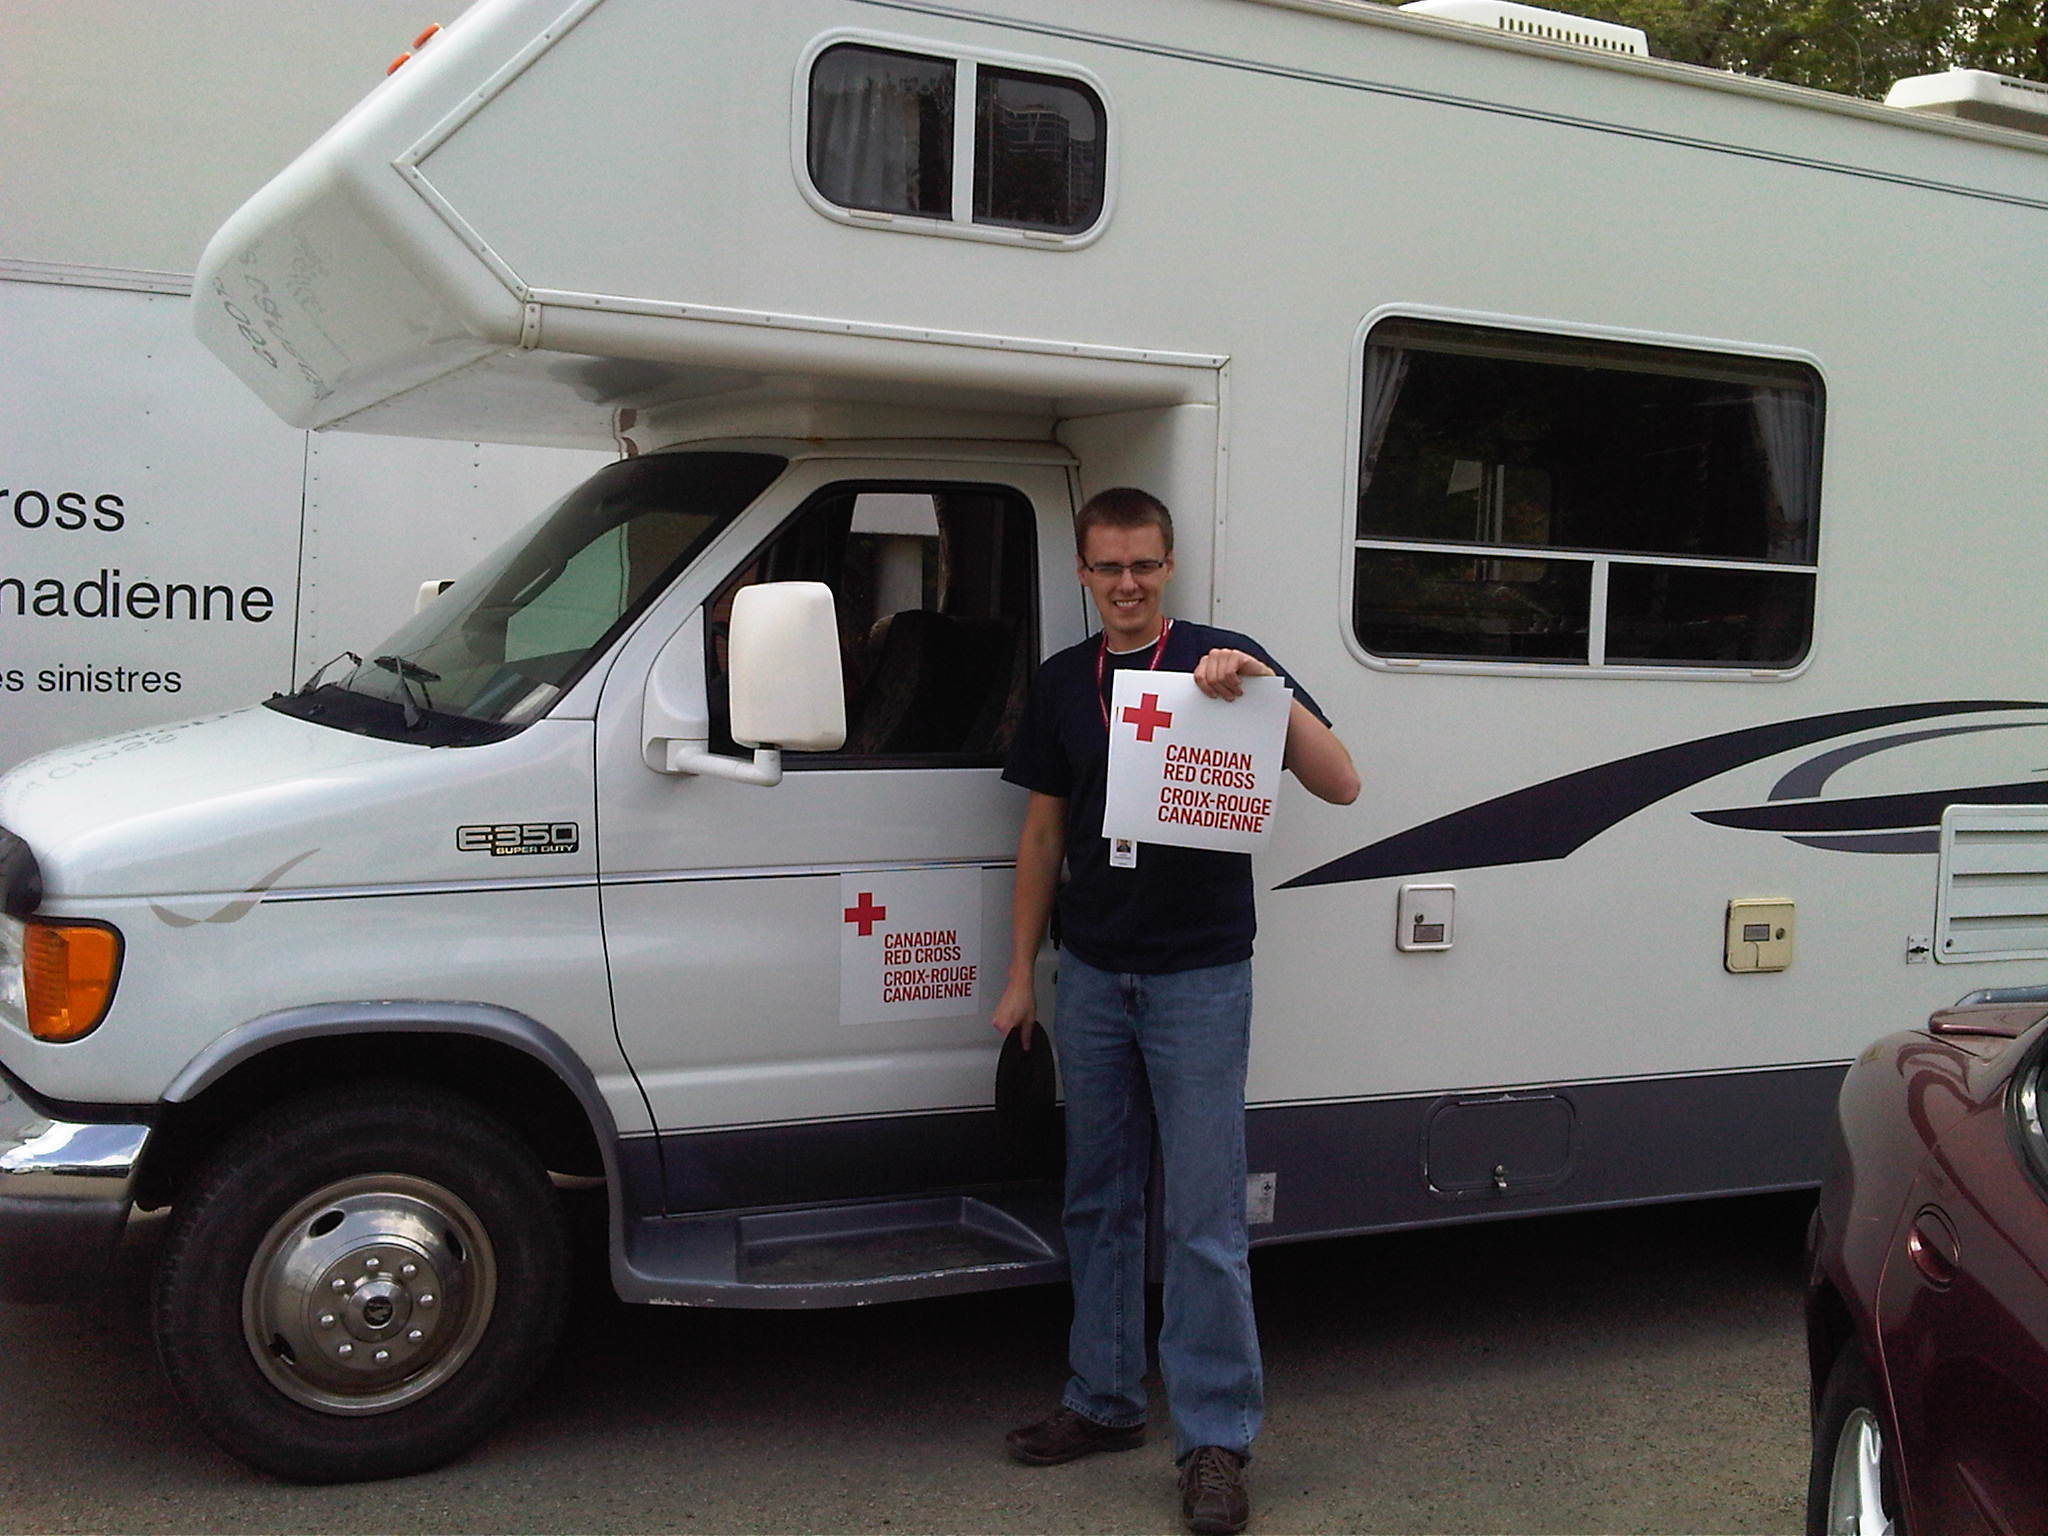 Logistics and first aid keep volunteer Aaron van Nostrand busy during the royal visit in Slave Lake, Alberta